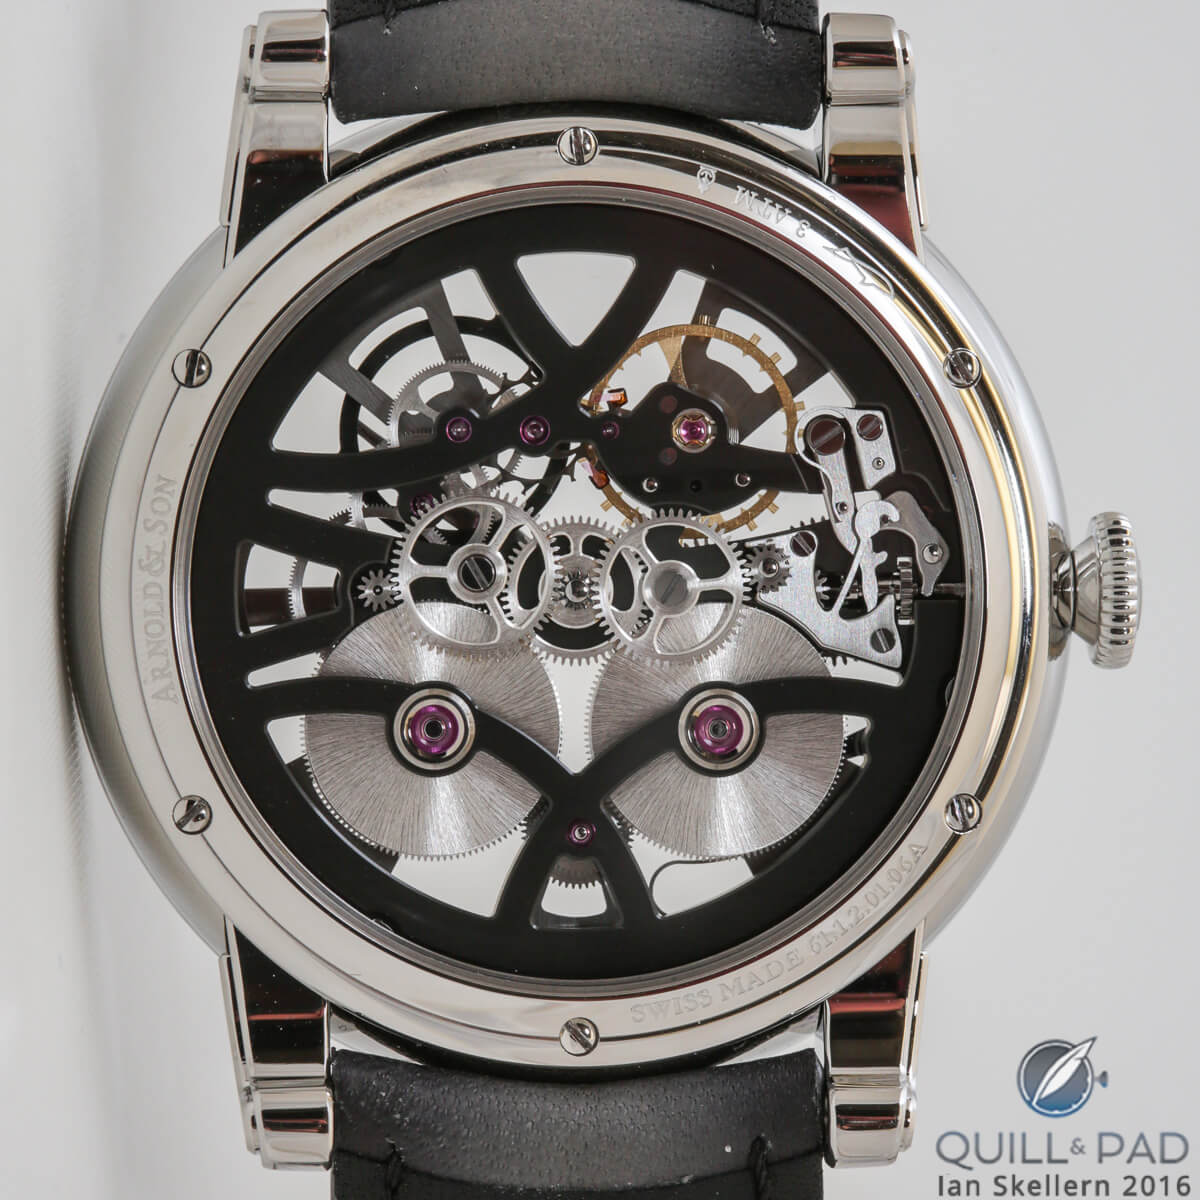 The Arnold & Son Nebula is symmetrical from left to right, up and down, and front-back